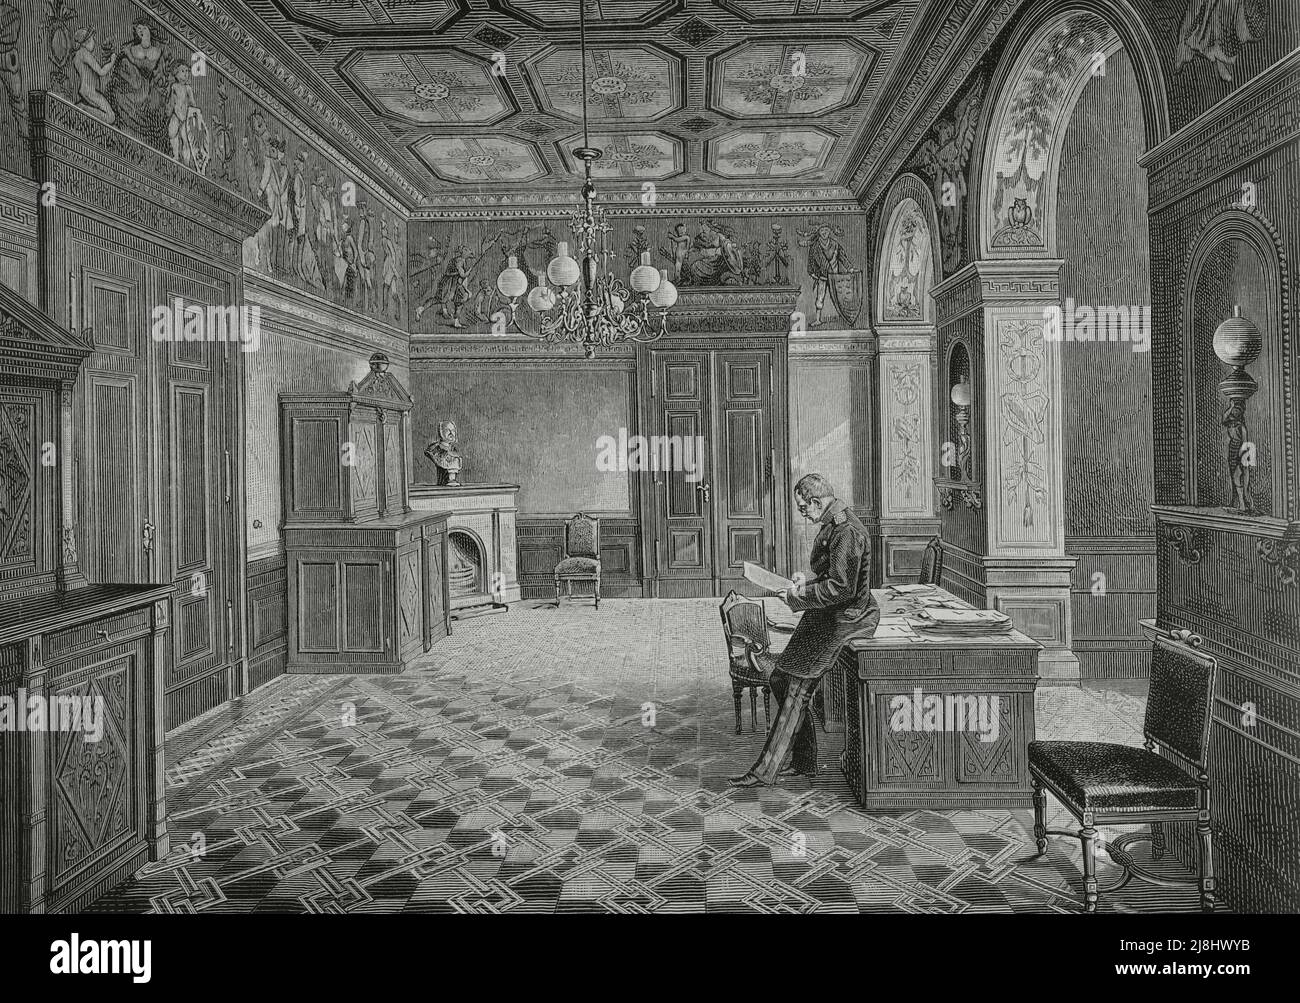 Helmuth von Moltke (1800-1891. German field marshal. Moltke in his cabinet in the German general staff palace. Berlin, Germany. Engraving, 1882. Stock Photo